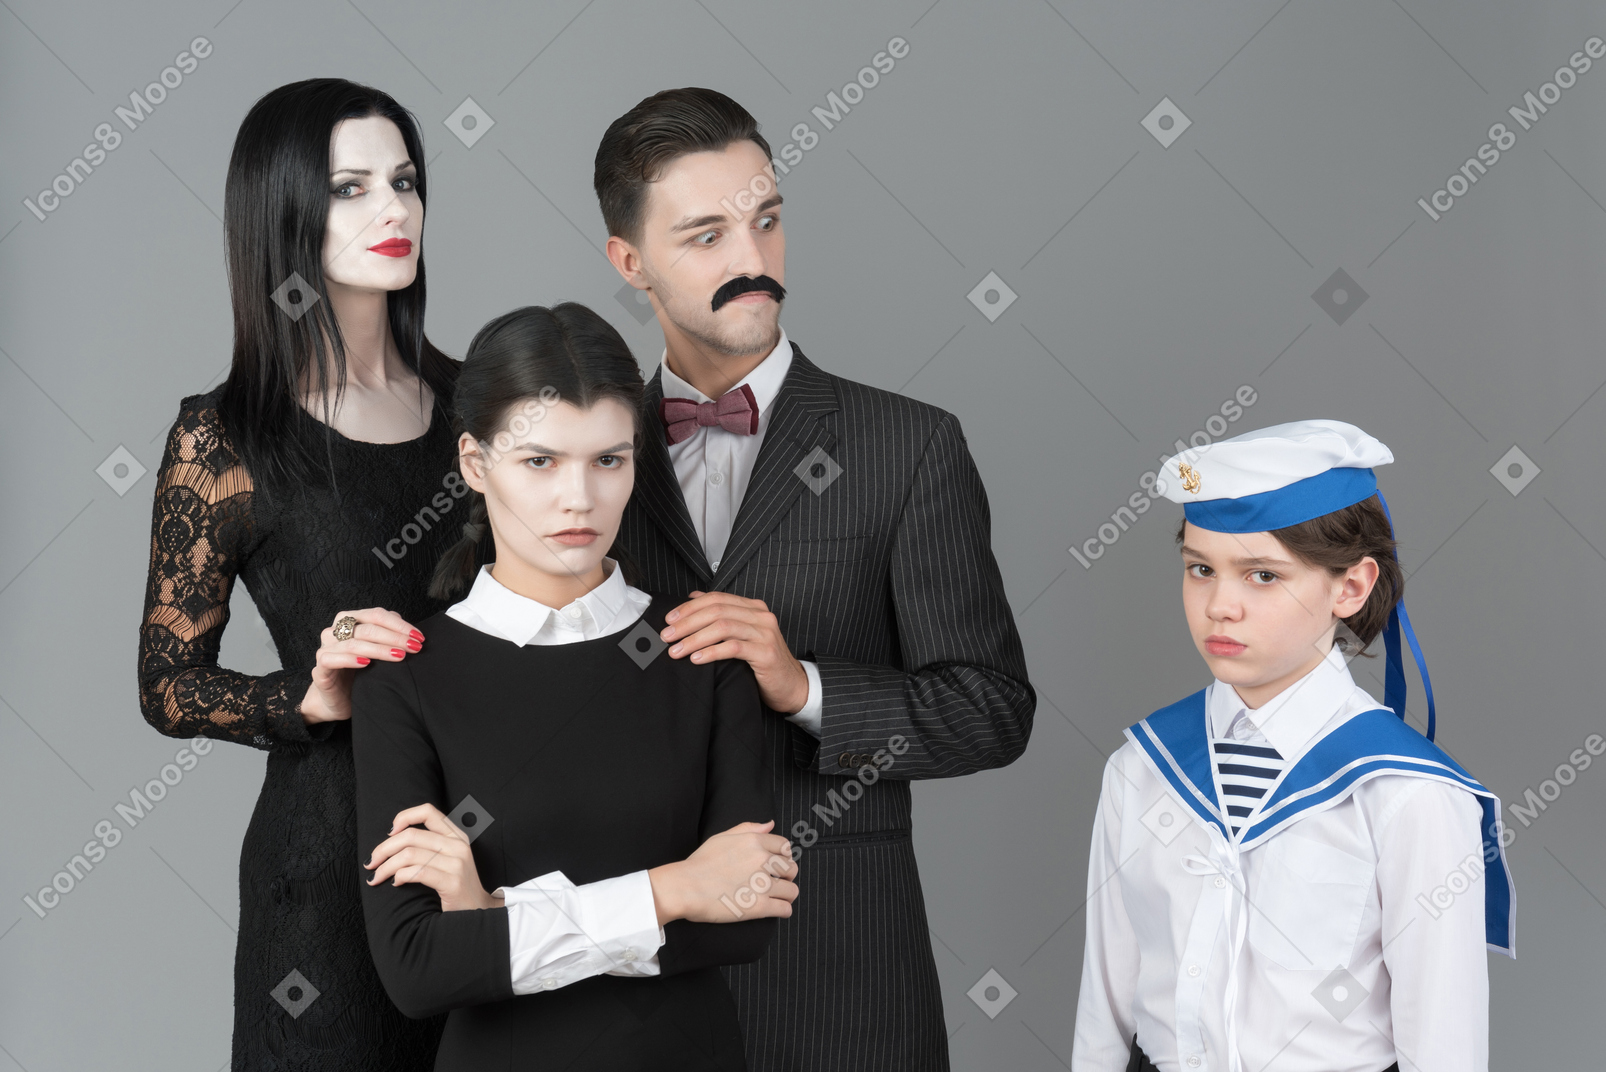 Addams family members and boy in sailor's uniform